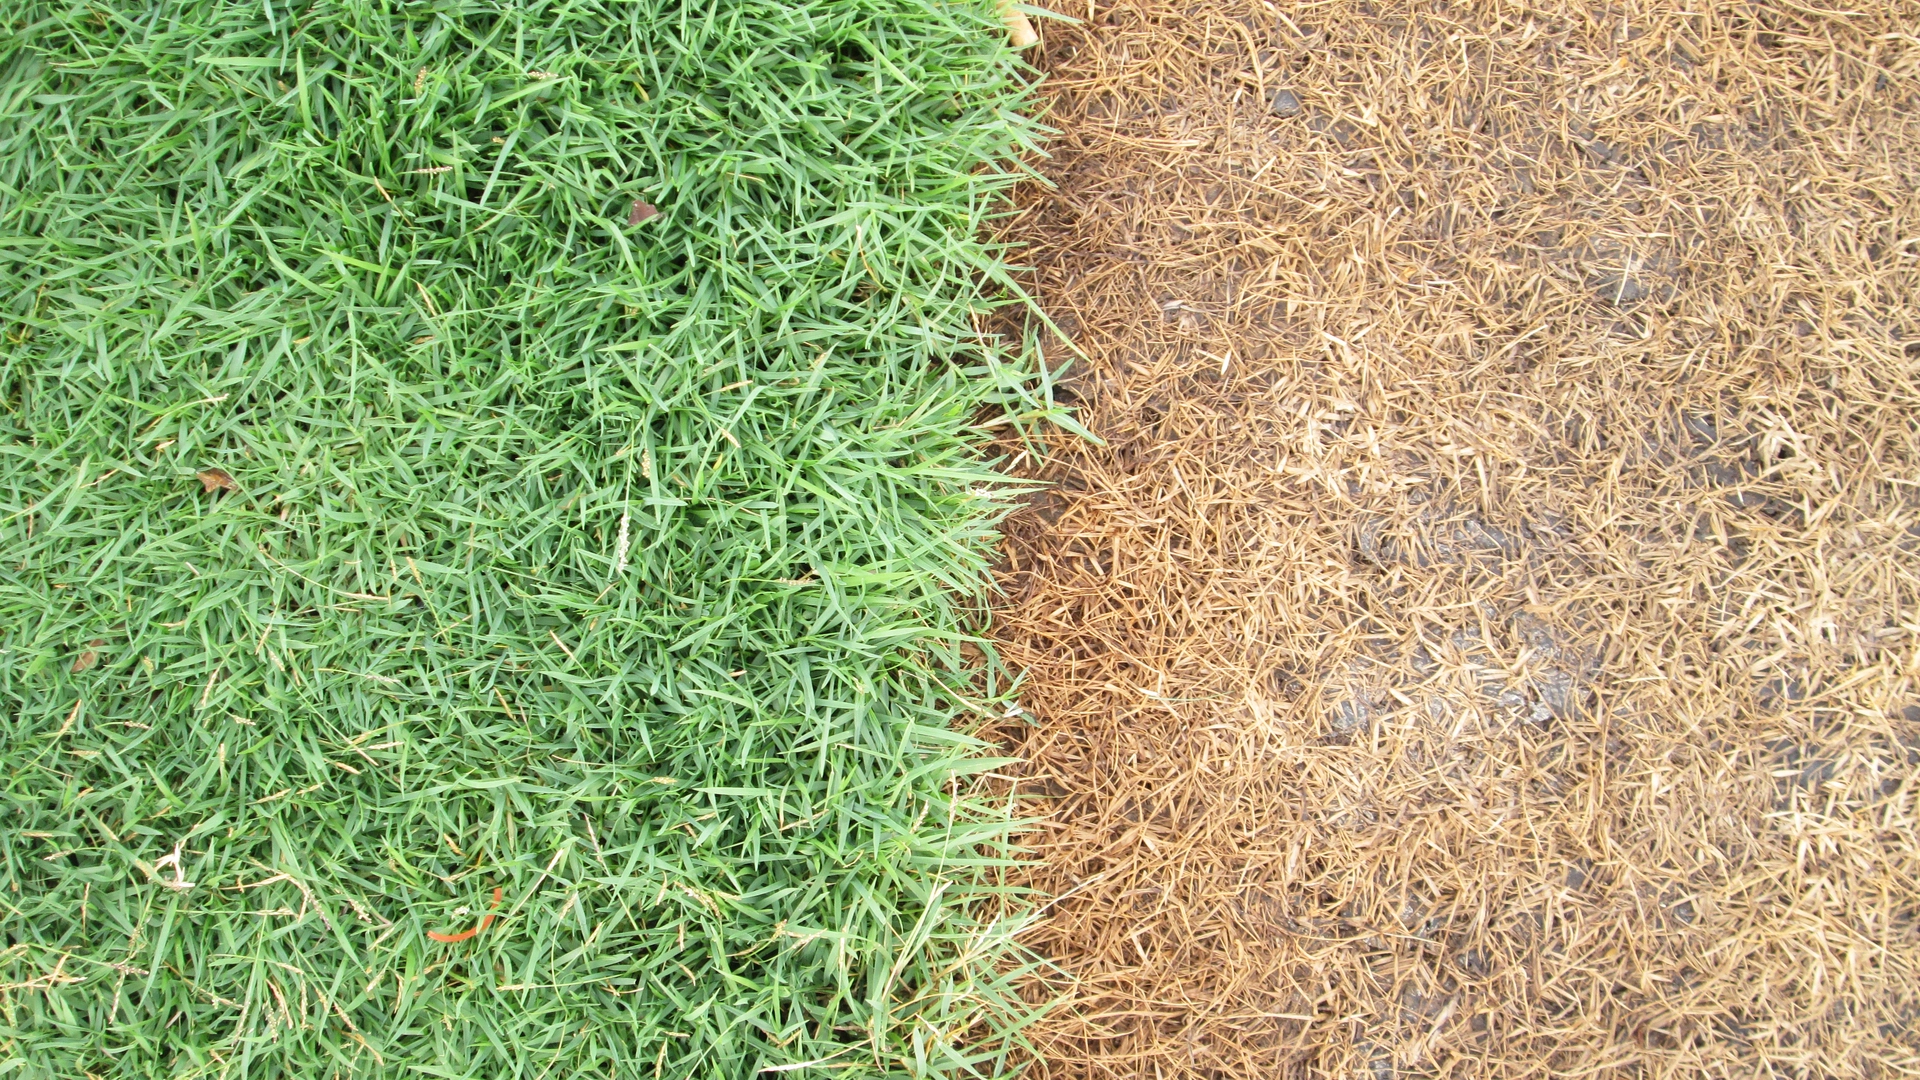 Drought vs Brown Patch Lawn Disease - How to Tell the Difference